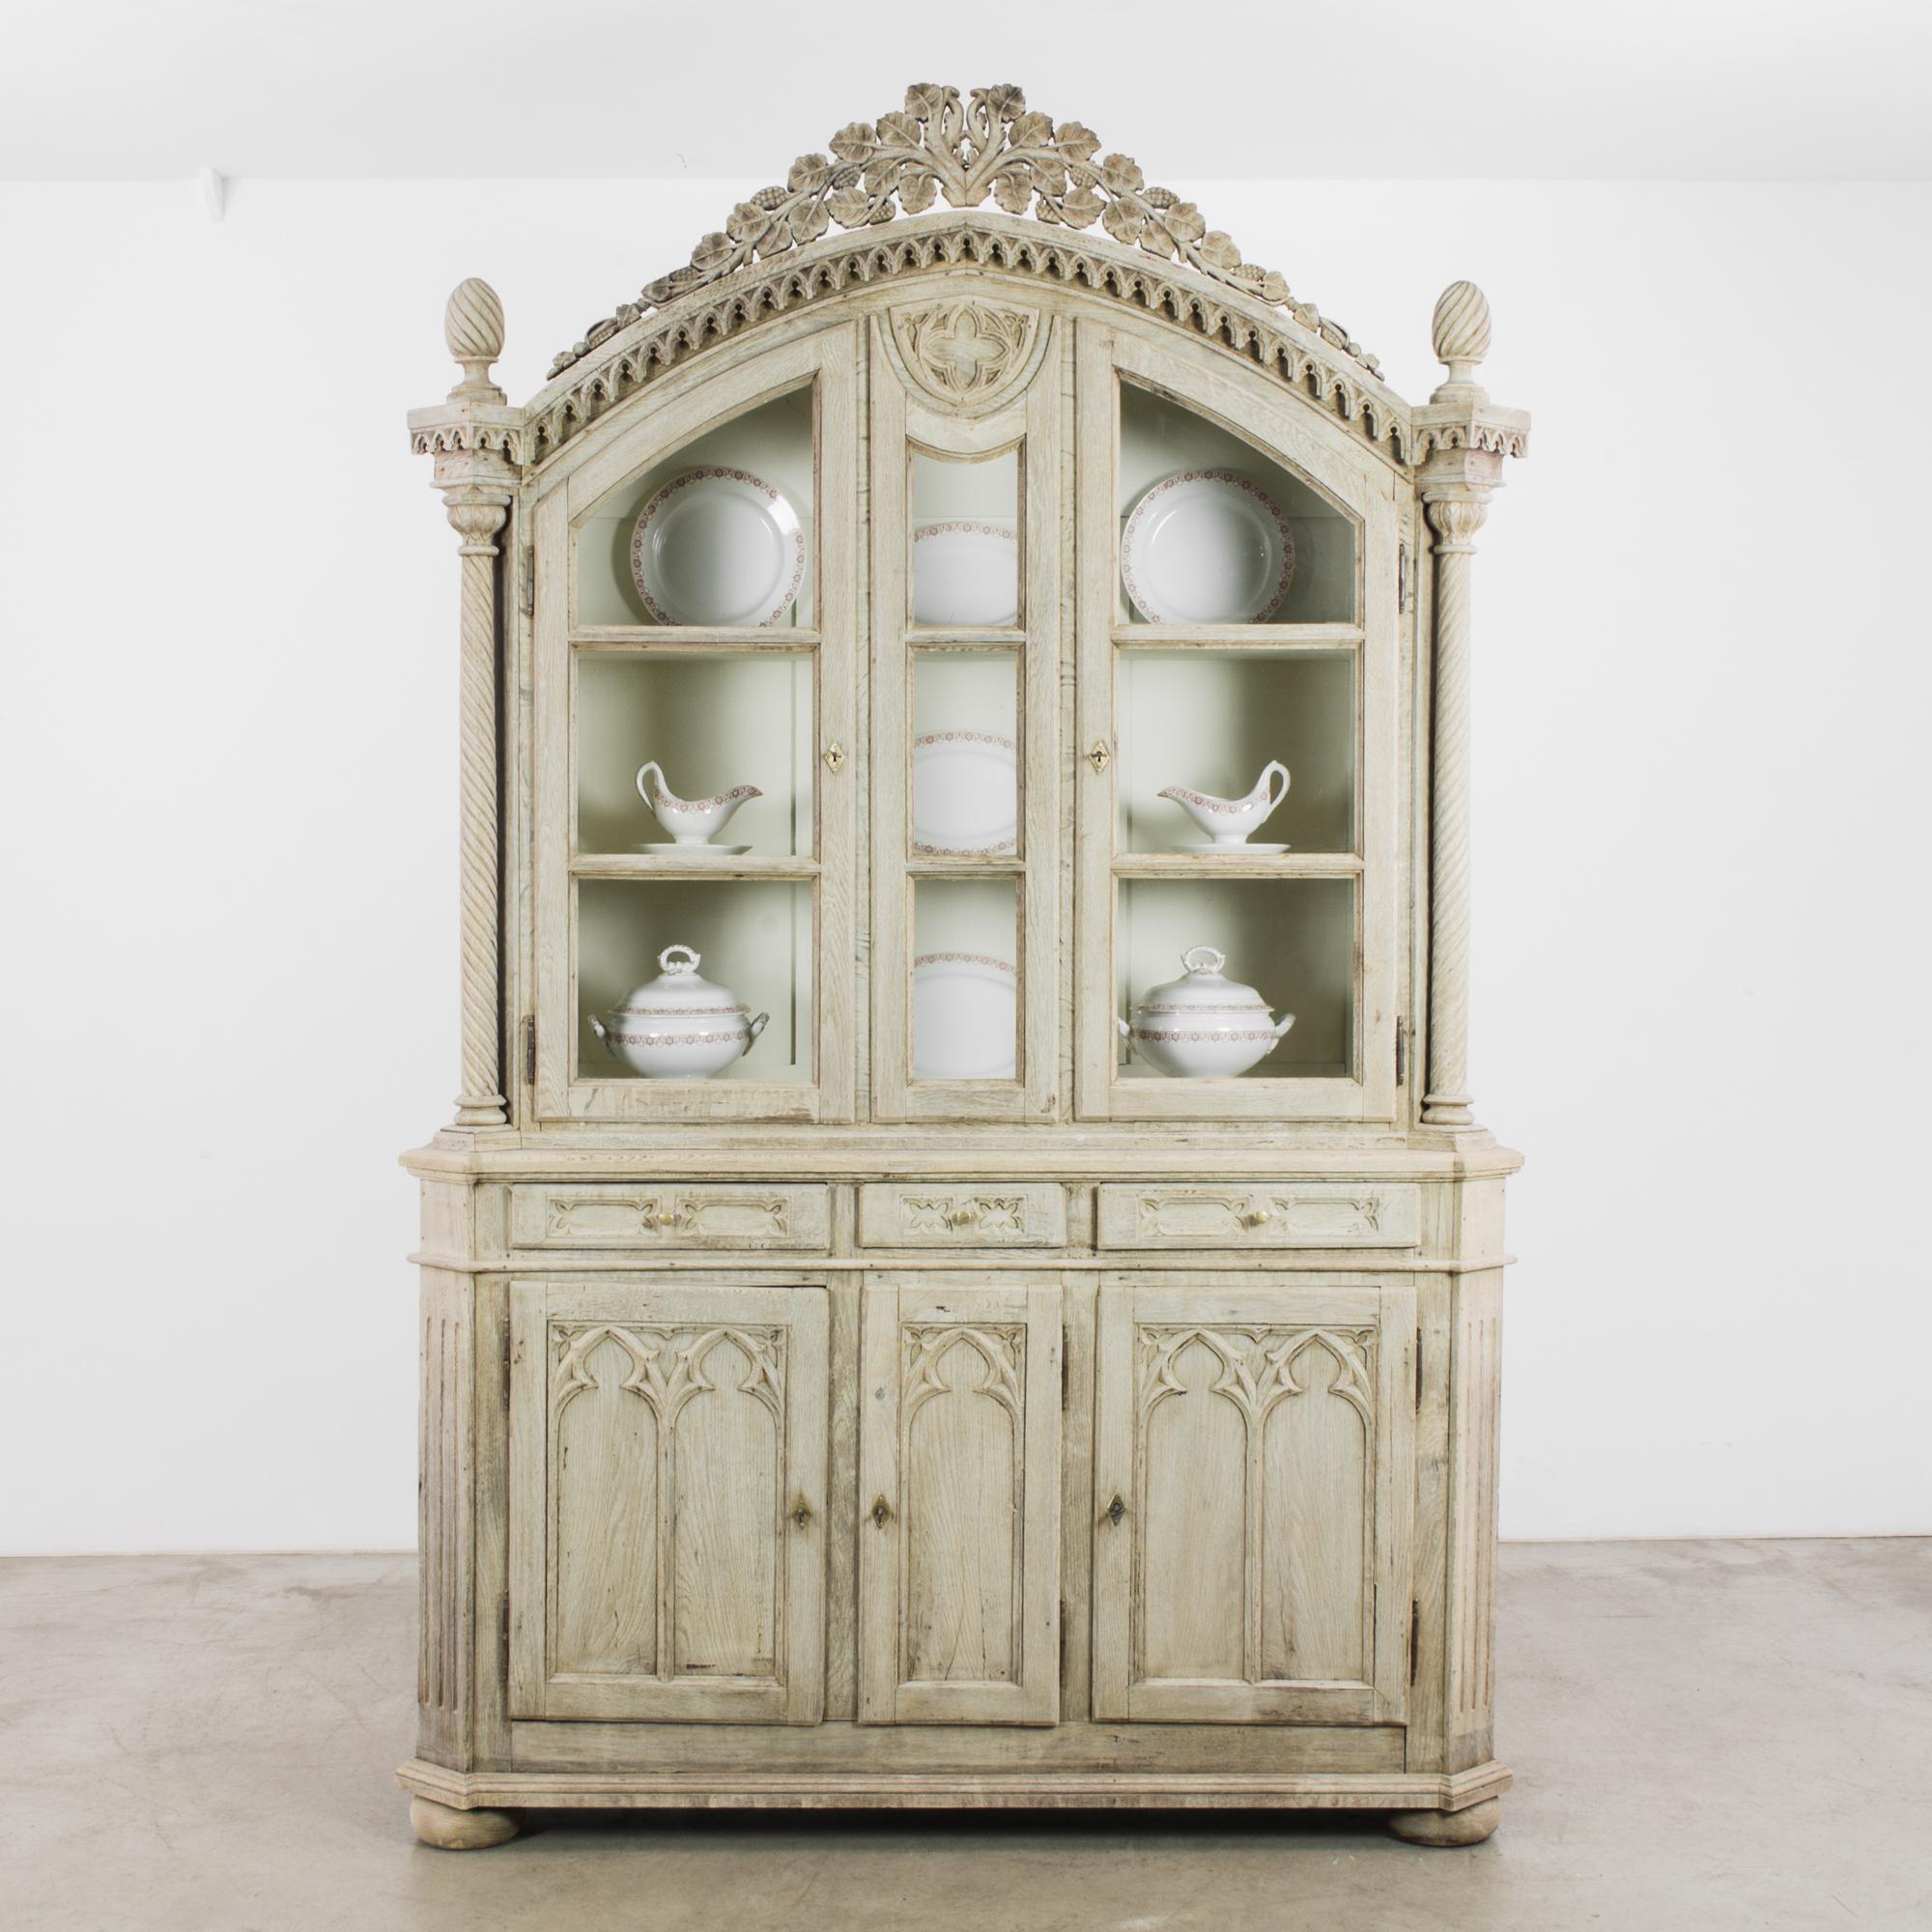 An antique oak vitrine circa 1860, sourced from Belgium. A gothic silhouette is festooned with elaborate ornament: Gothic dorr panels, spiral columns, a quatrefoil centerpiece. The oak has been restored to a pale, moonlit tone, a natural finish